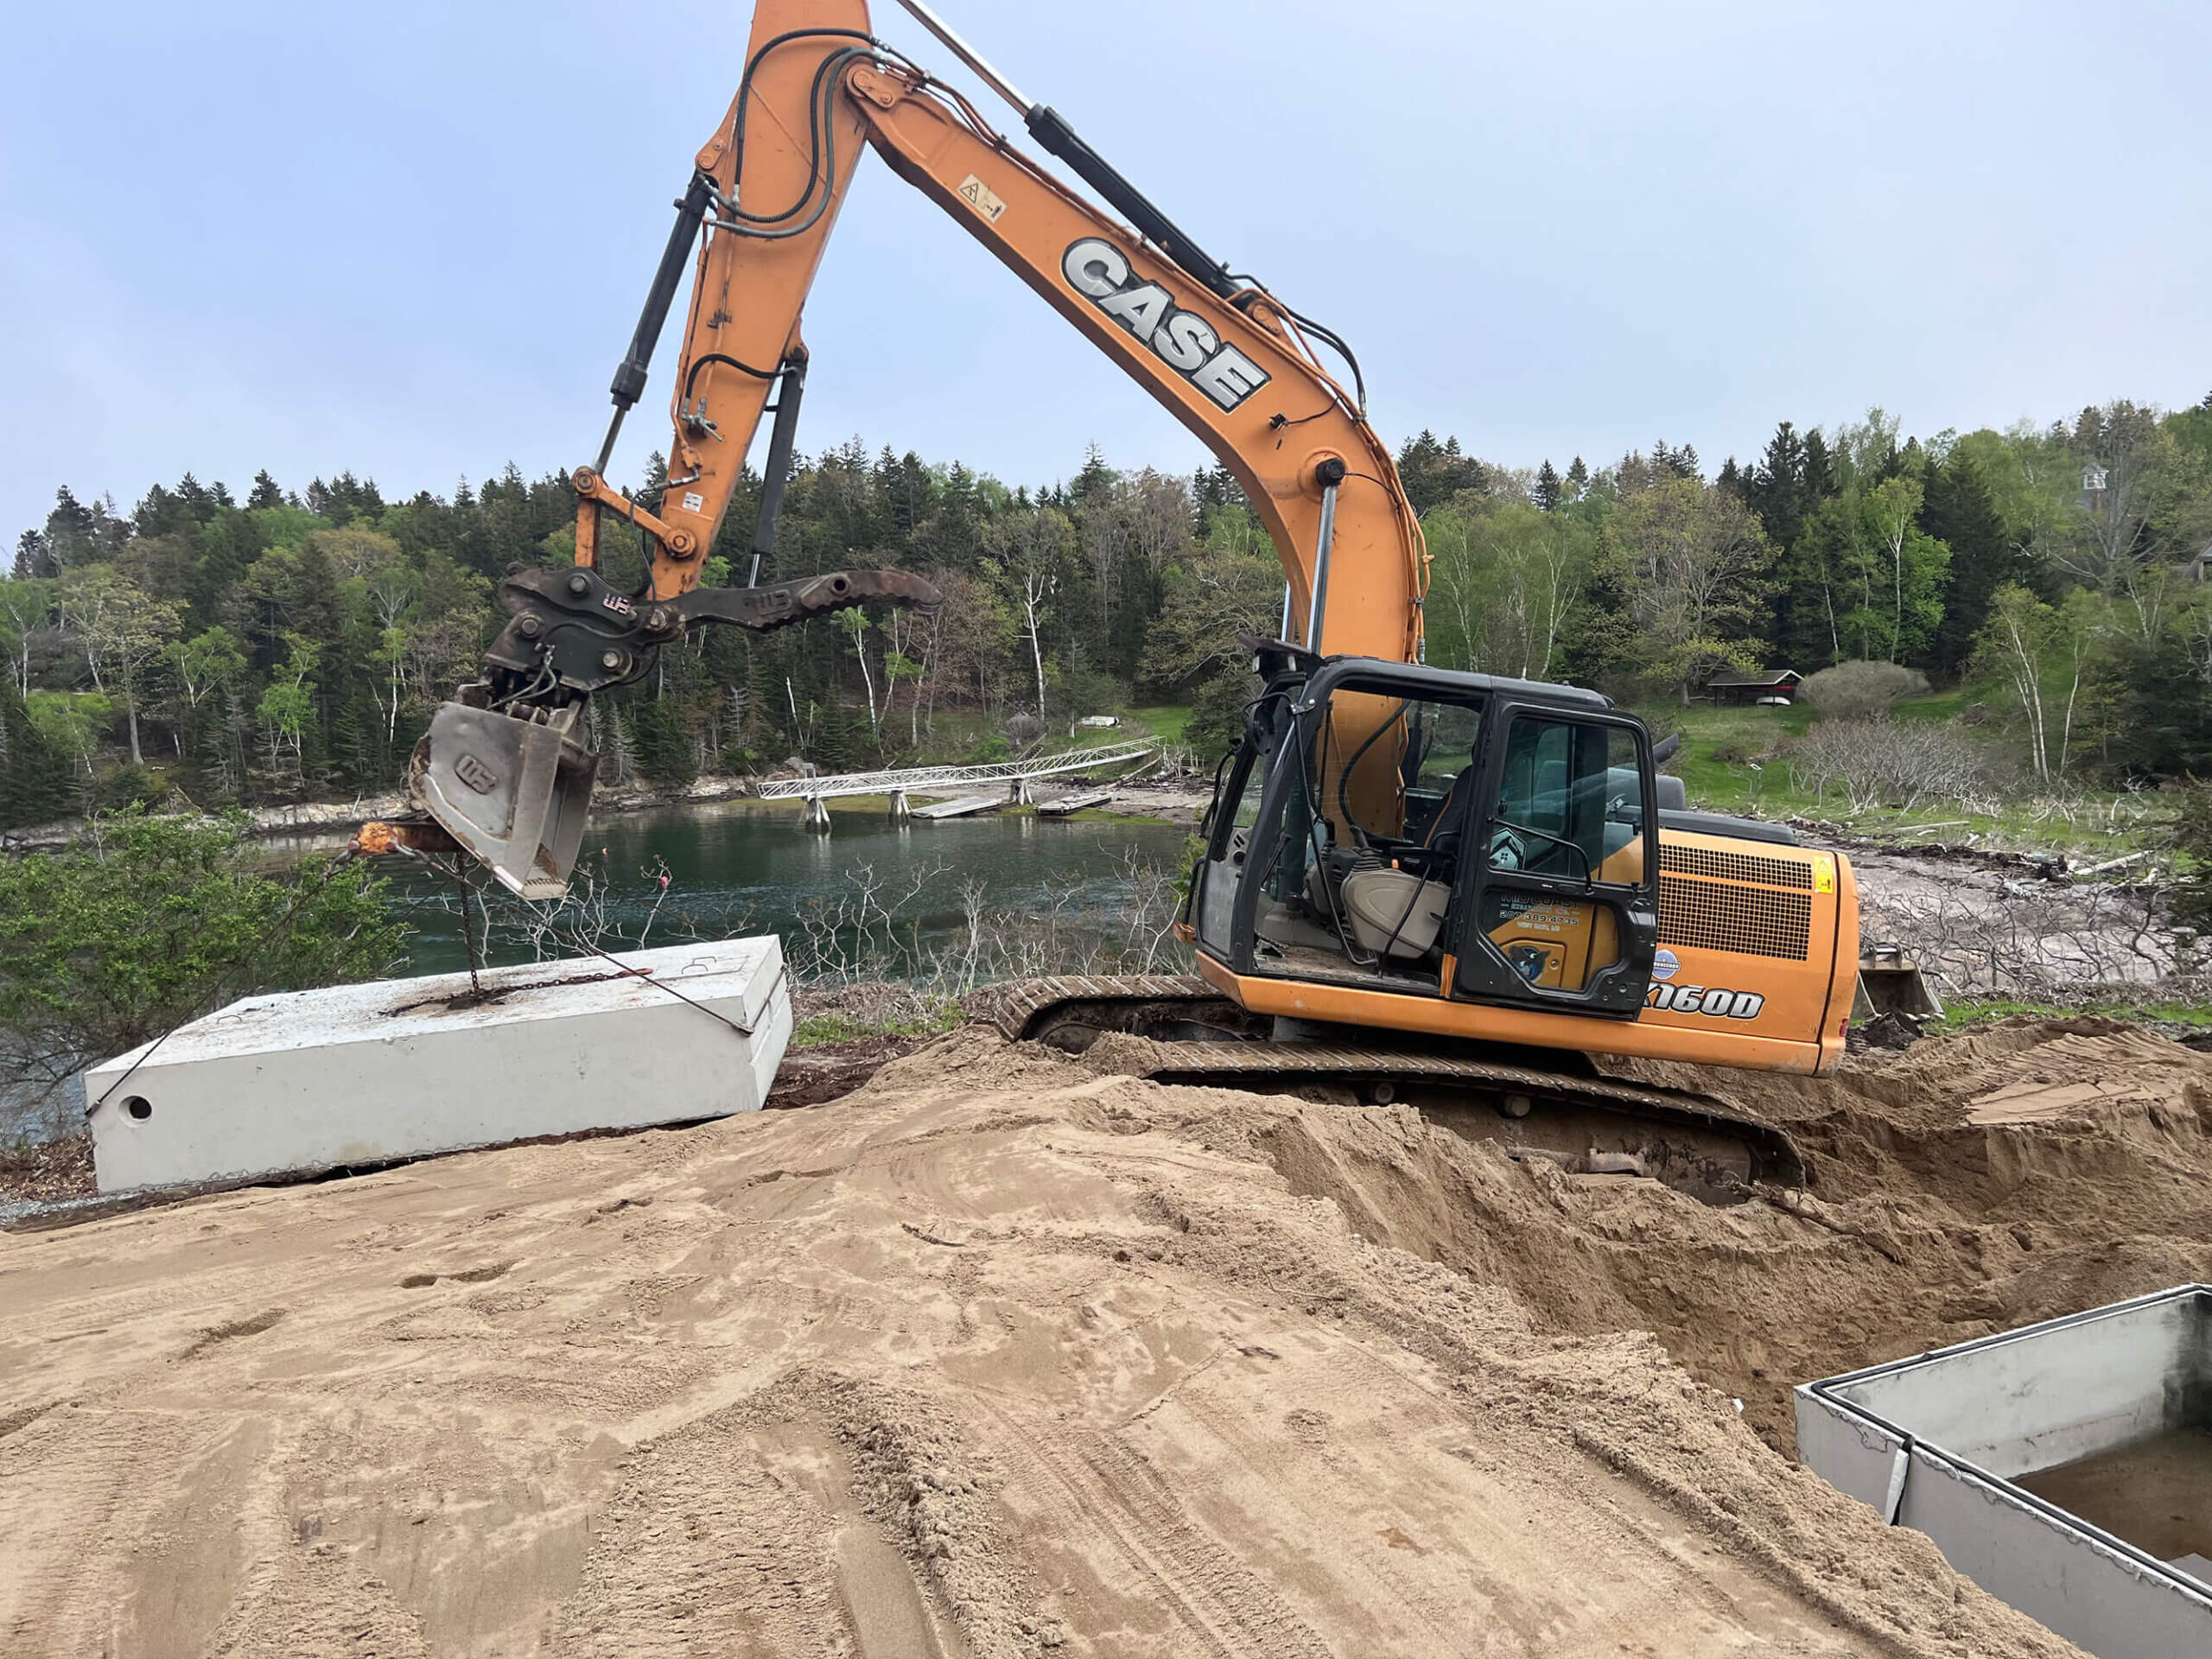 Construction Project: Excavator picking up concrete septic tank for Residential Site Development on Haskell Island